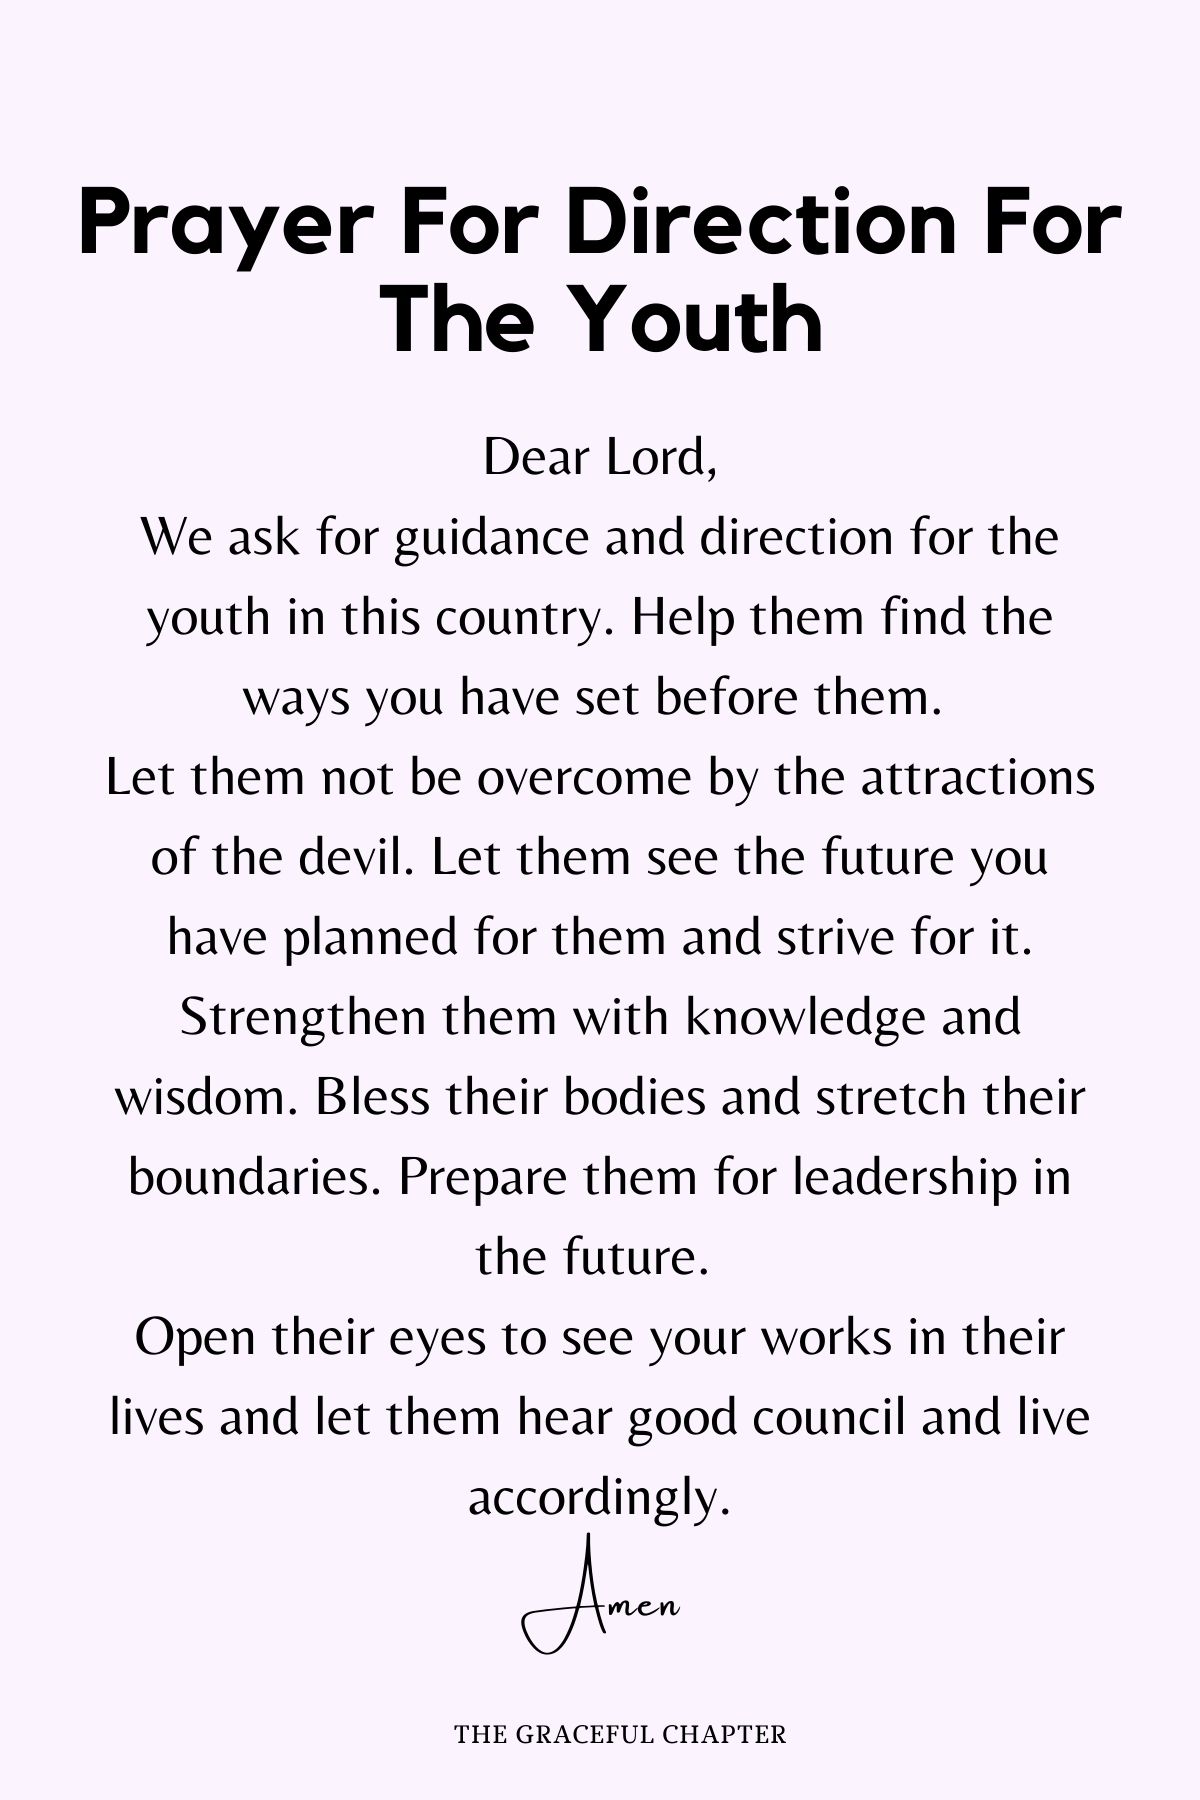 Prayer for direction for the youth